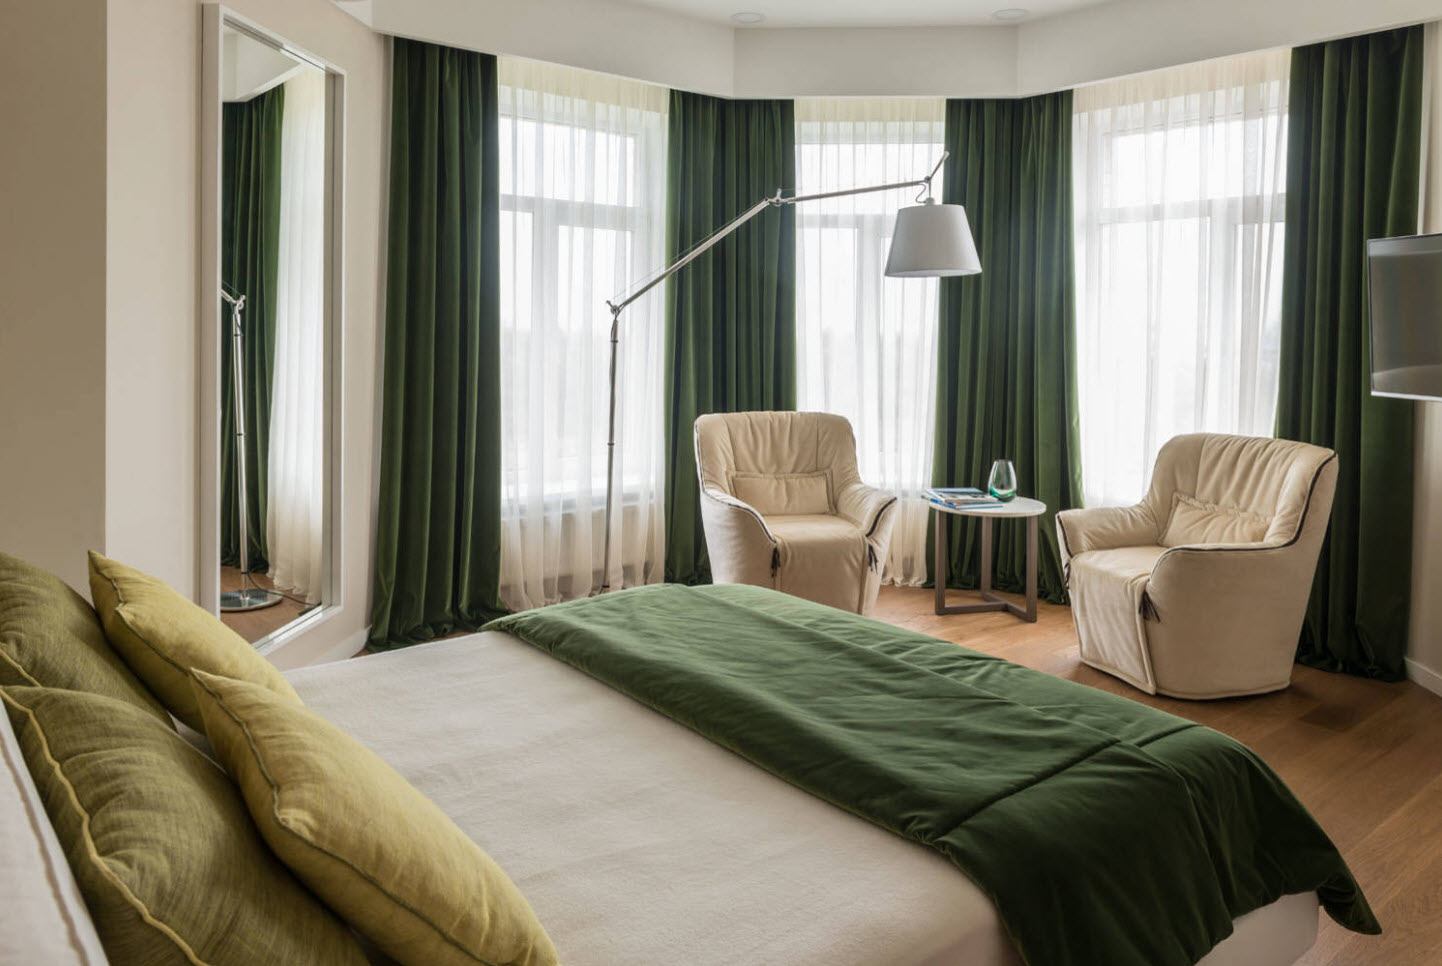 Bedroom Curtains: Full Guide on How to Decorate the Windows. Emerald depth of color in the large casual styled room